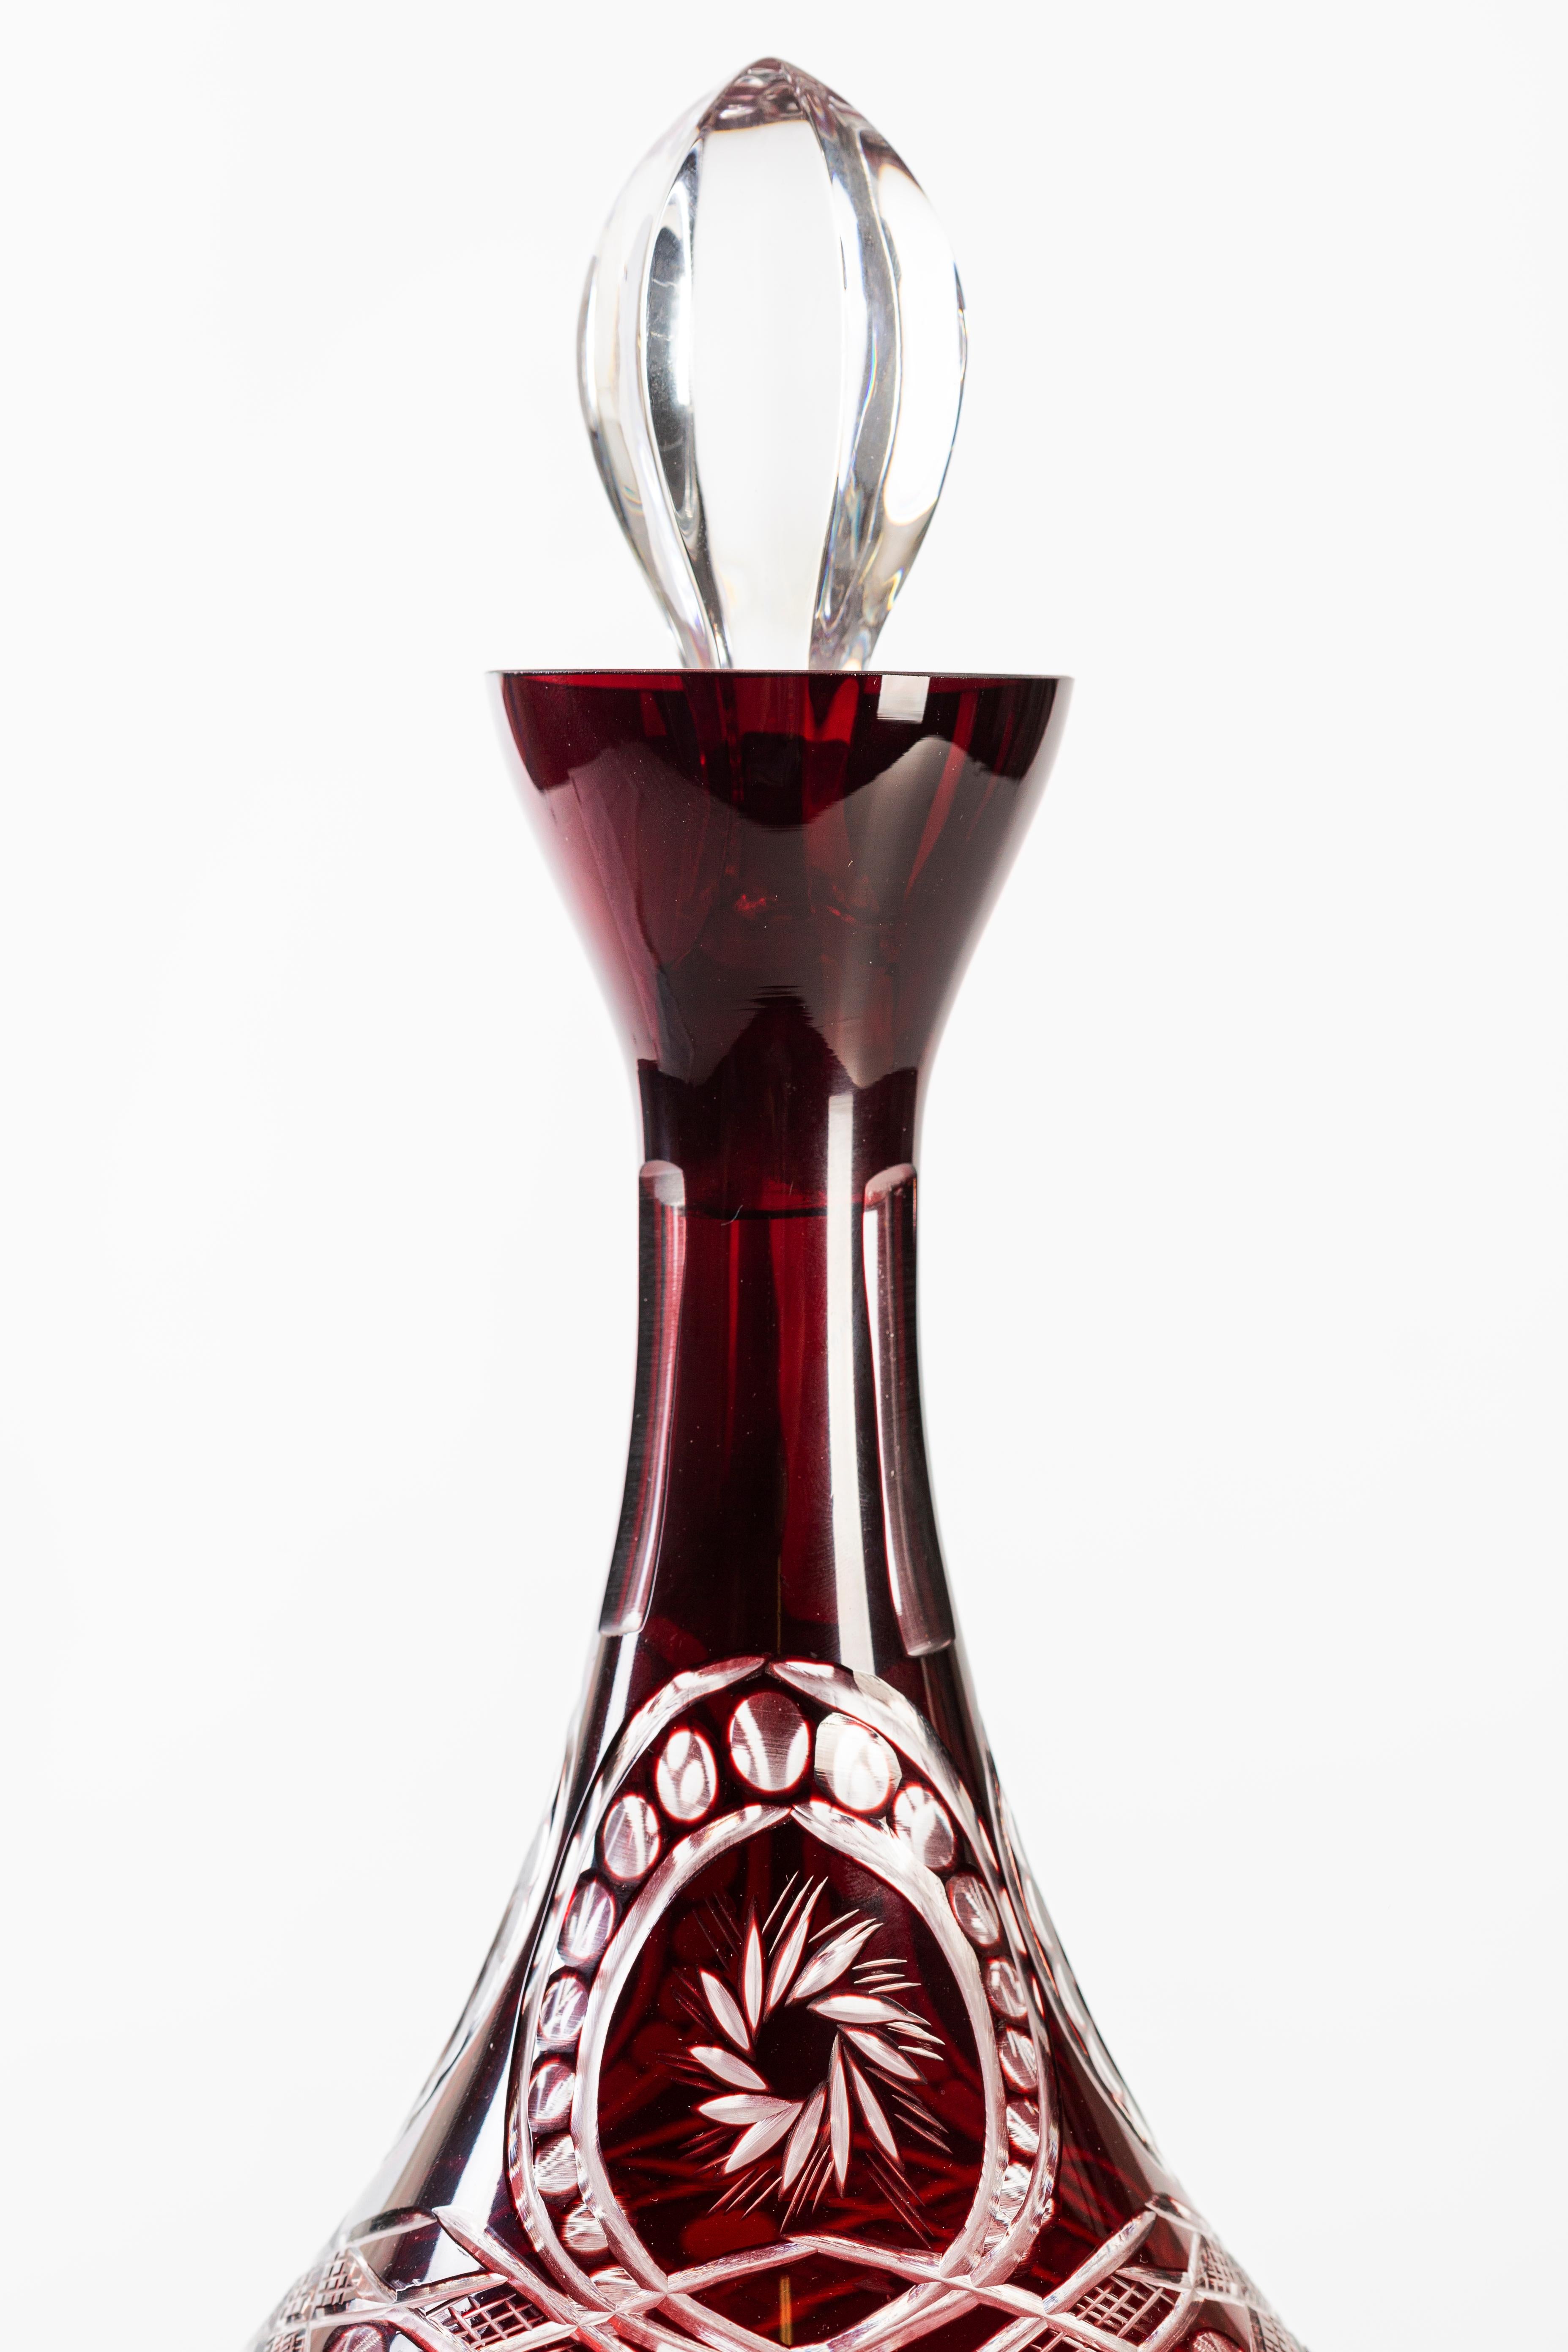 Liqueur set is an original decorative object realized in the 1930s in Bohemian glass.

This wonderful liqueur set consisting of a carafe and six goblets, clear glass bordeaux red overlaid, slender carafe shape on a round base with stopper, cut